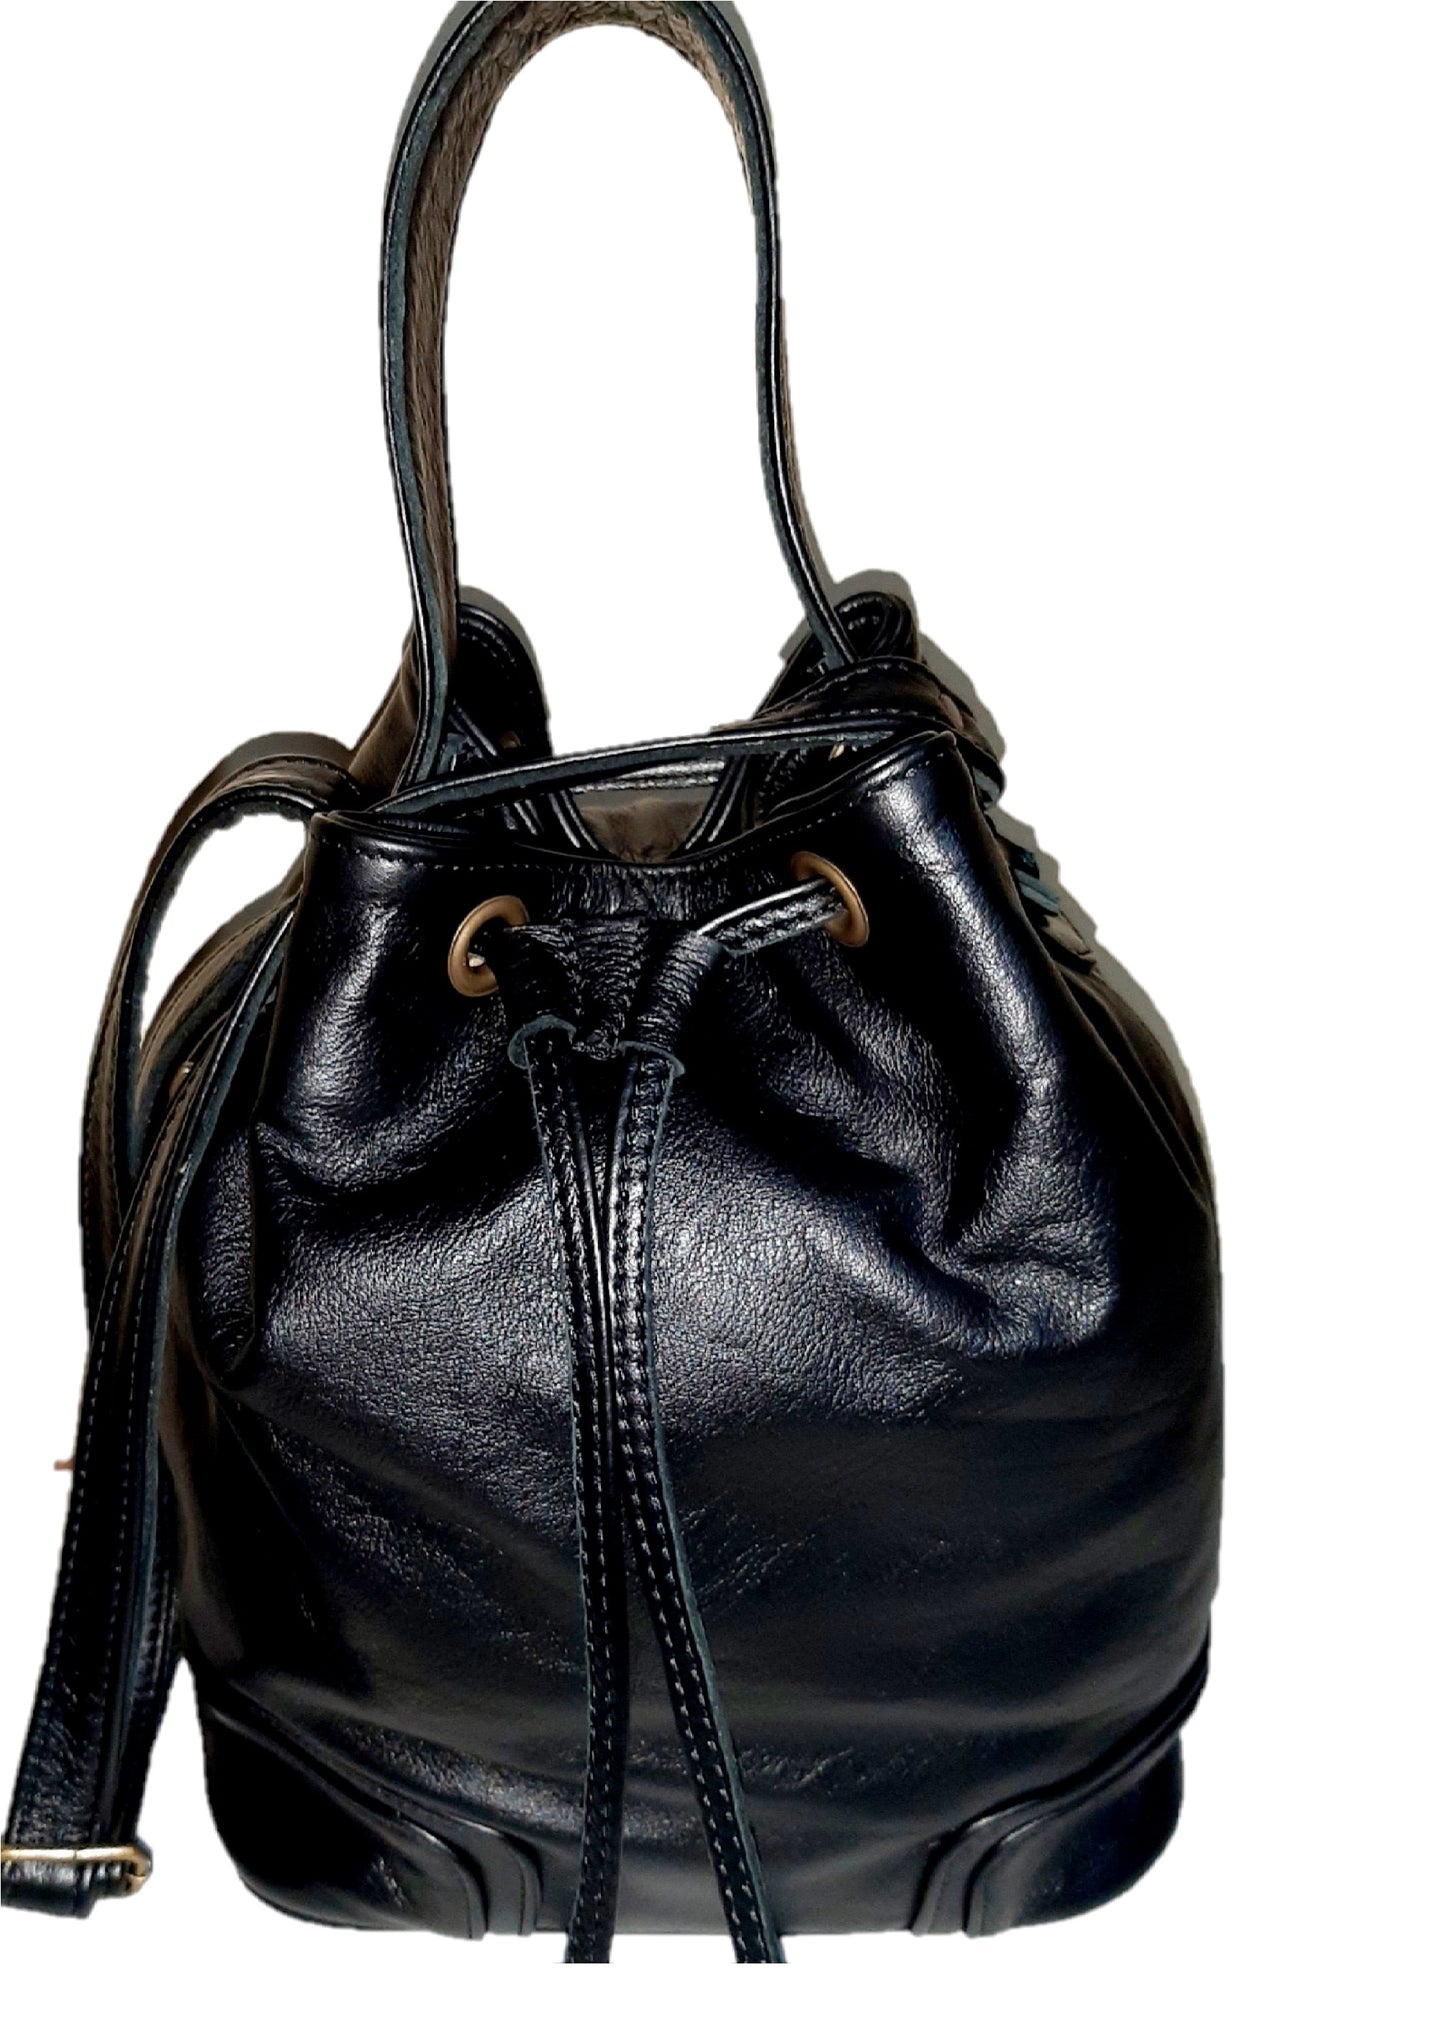 Tin bucket bags black is genuine leather hand made products by Cape Masai  Leather in Cape Town  South Africa.